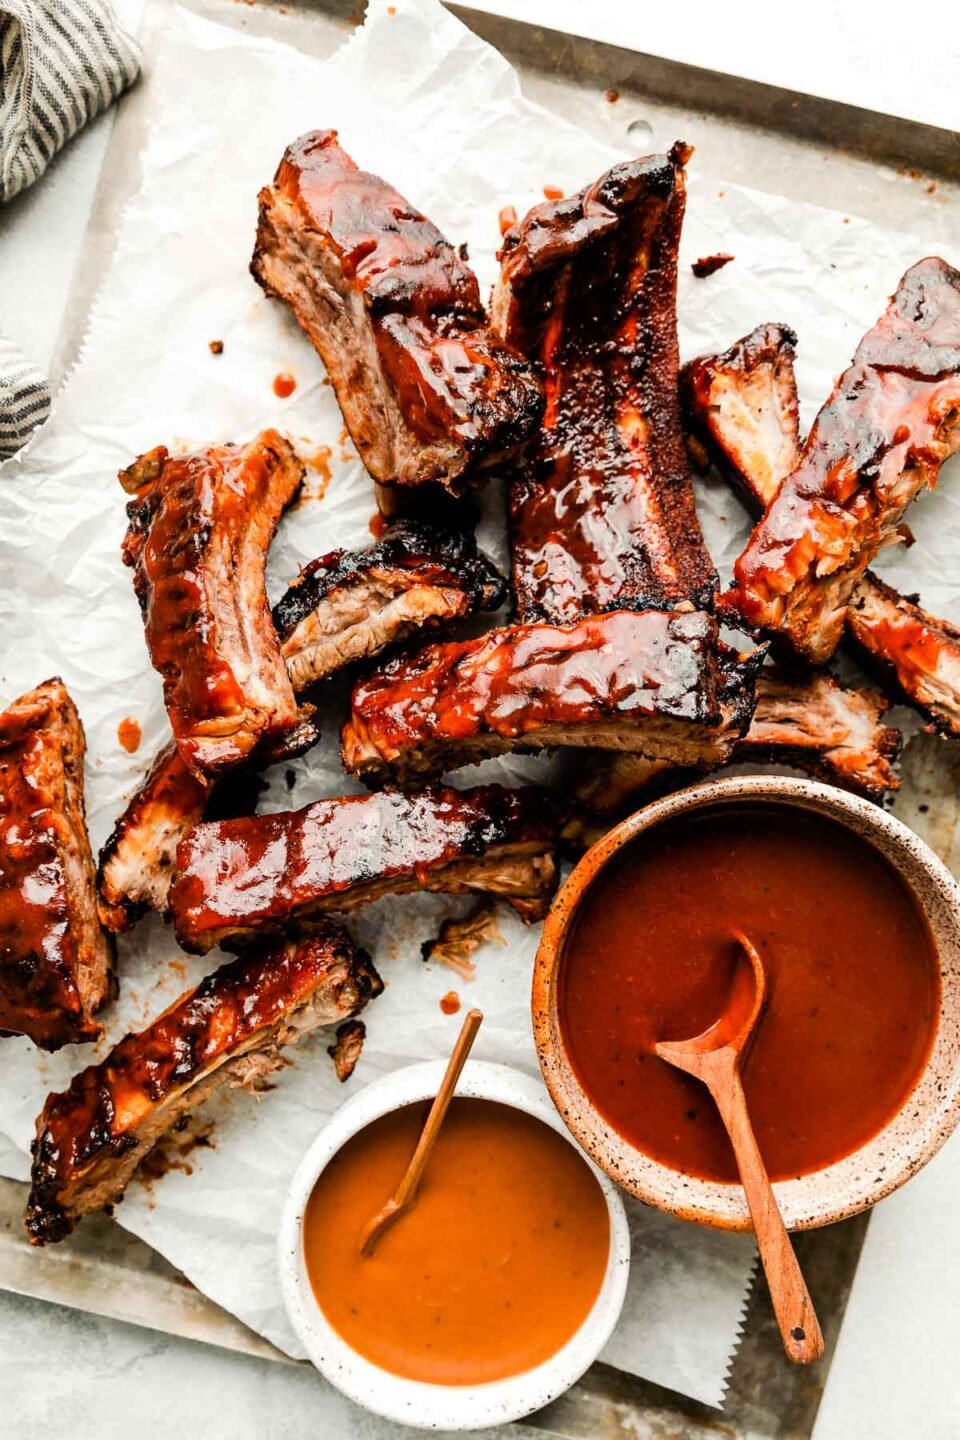 An overhead shot of individual grilled ribs on a paper-lined sheet pan atop a white surface. Two bowls of BBQ sauce sit alongside them.